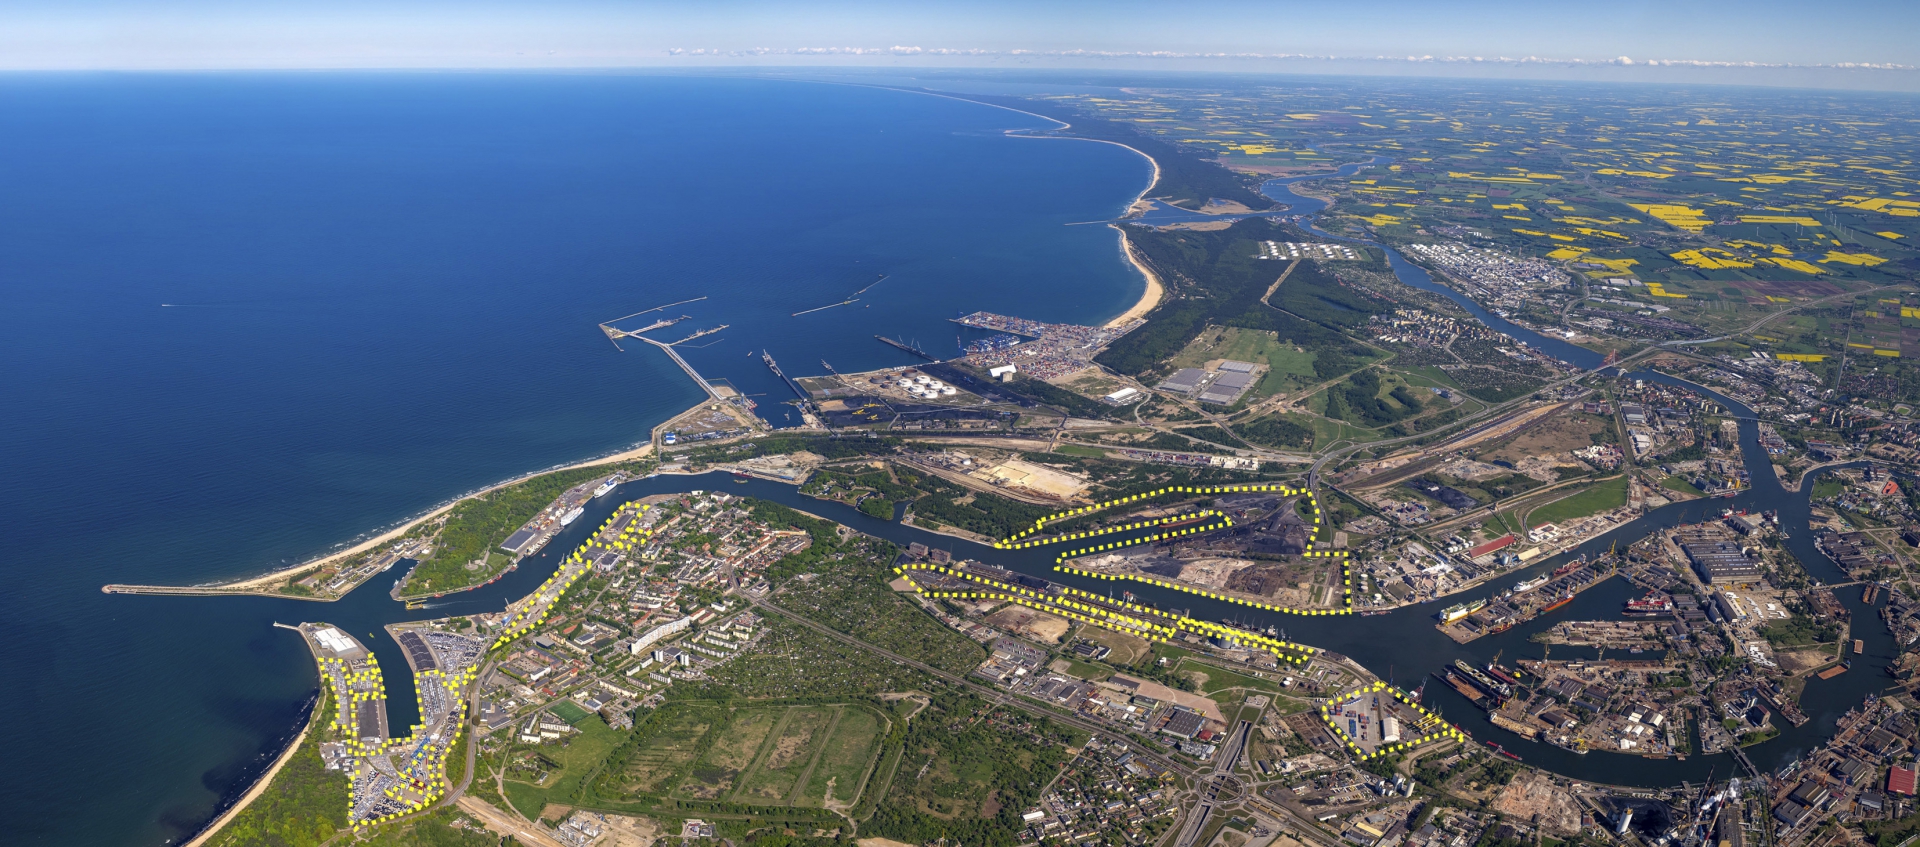 The Port of Gdansk summarized the year 2020. Despite the crisis, it handled 48 million tons, and the investment pace is not slowing down - MarinePoland.com